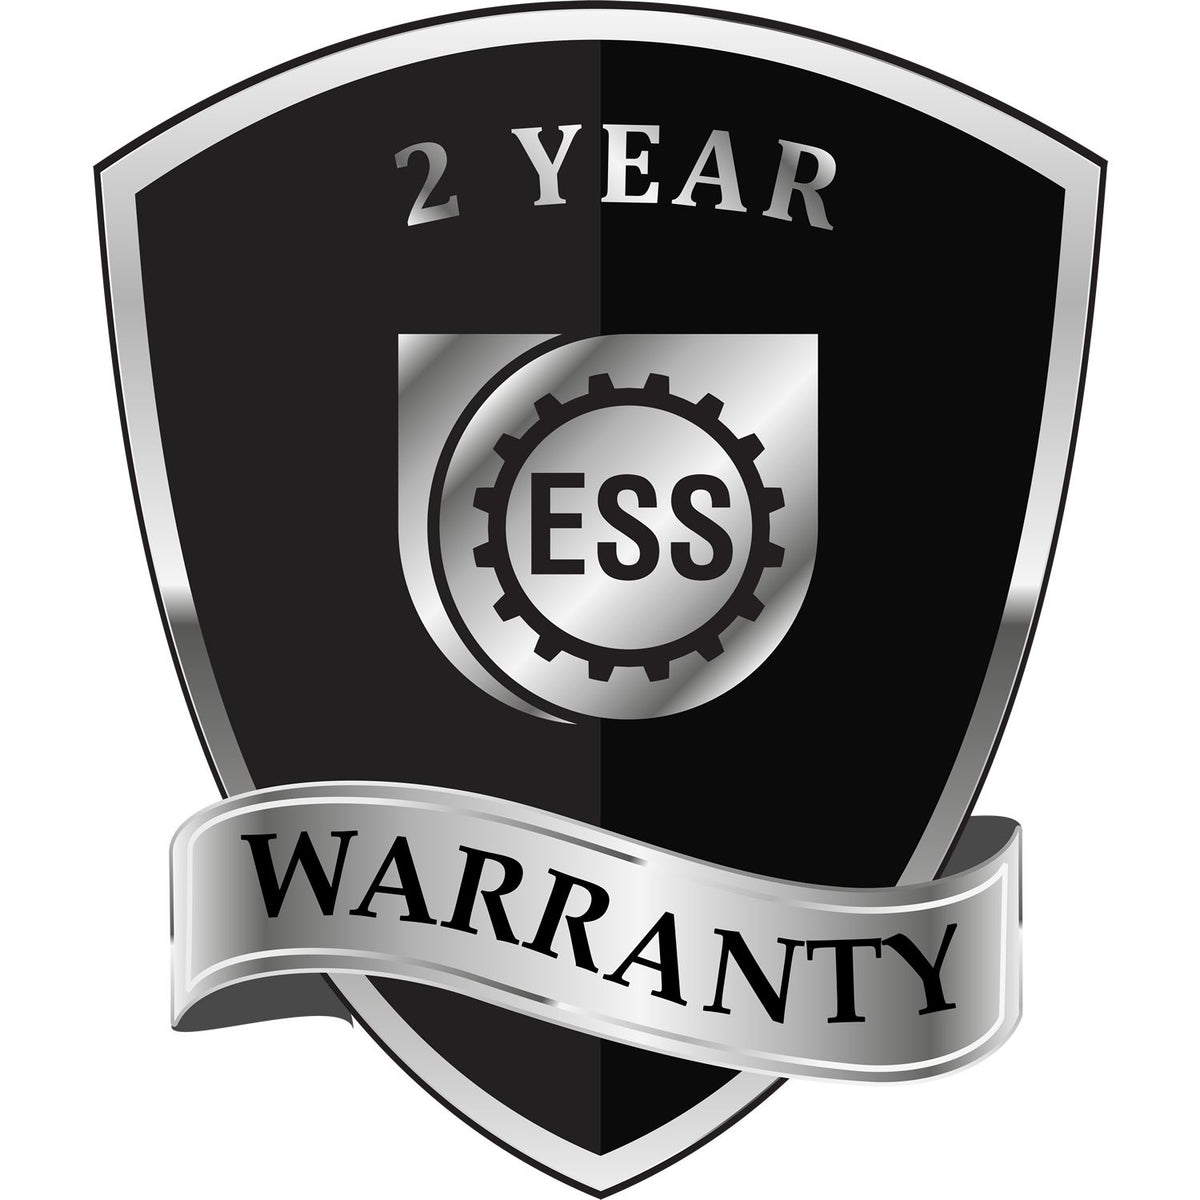 A black and silver badge or emblem showing warranty information for the Gift Louisiana Engineer Seal